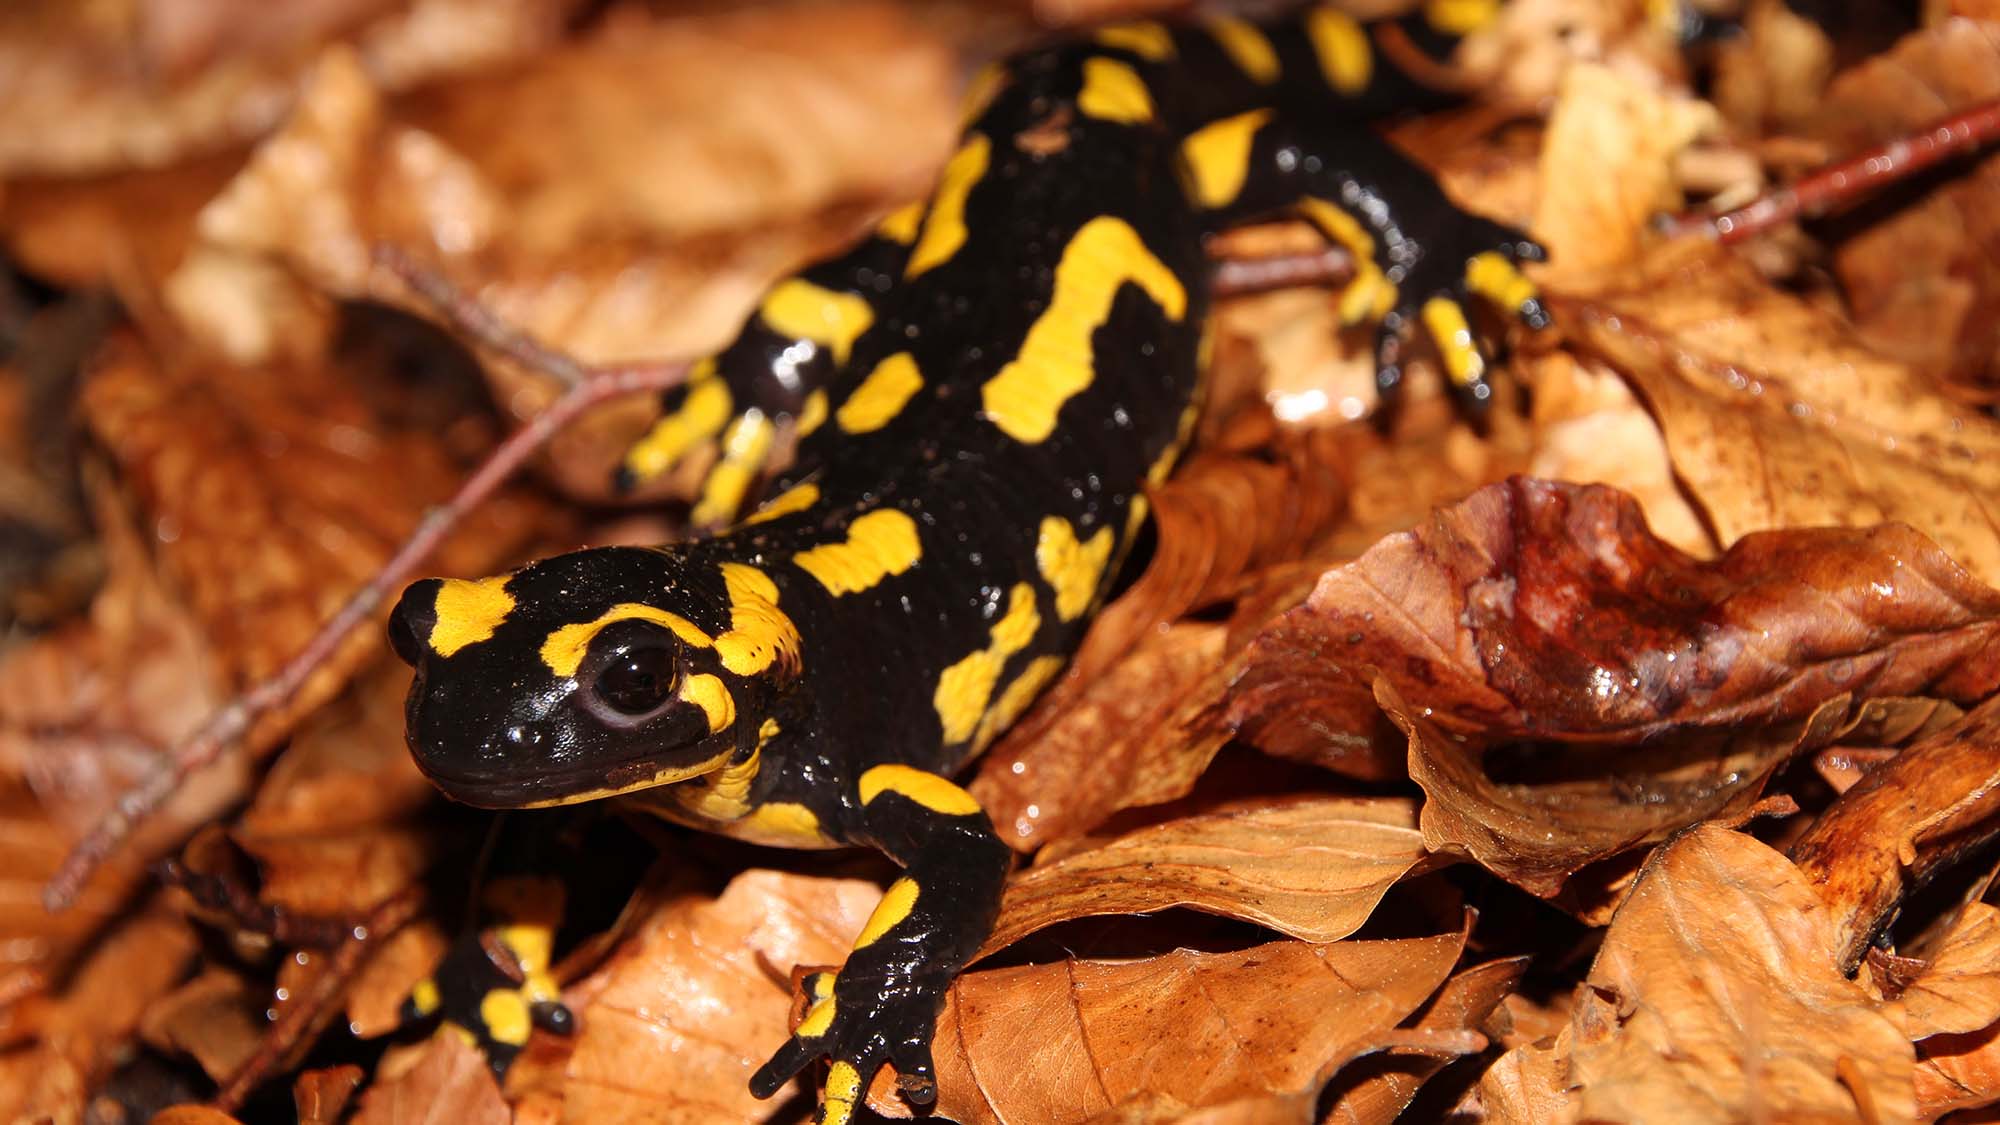 IBE leads an interdisciplinary project for amphibian conservation in Catalonia